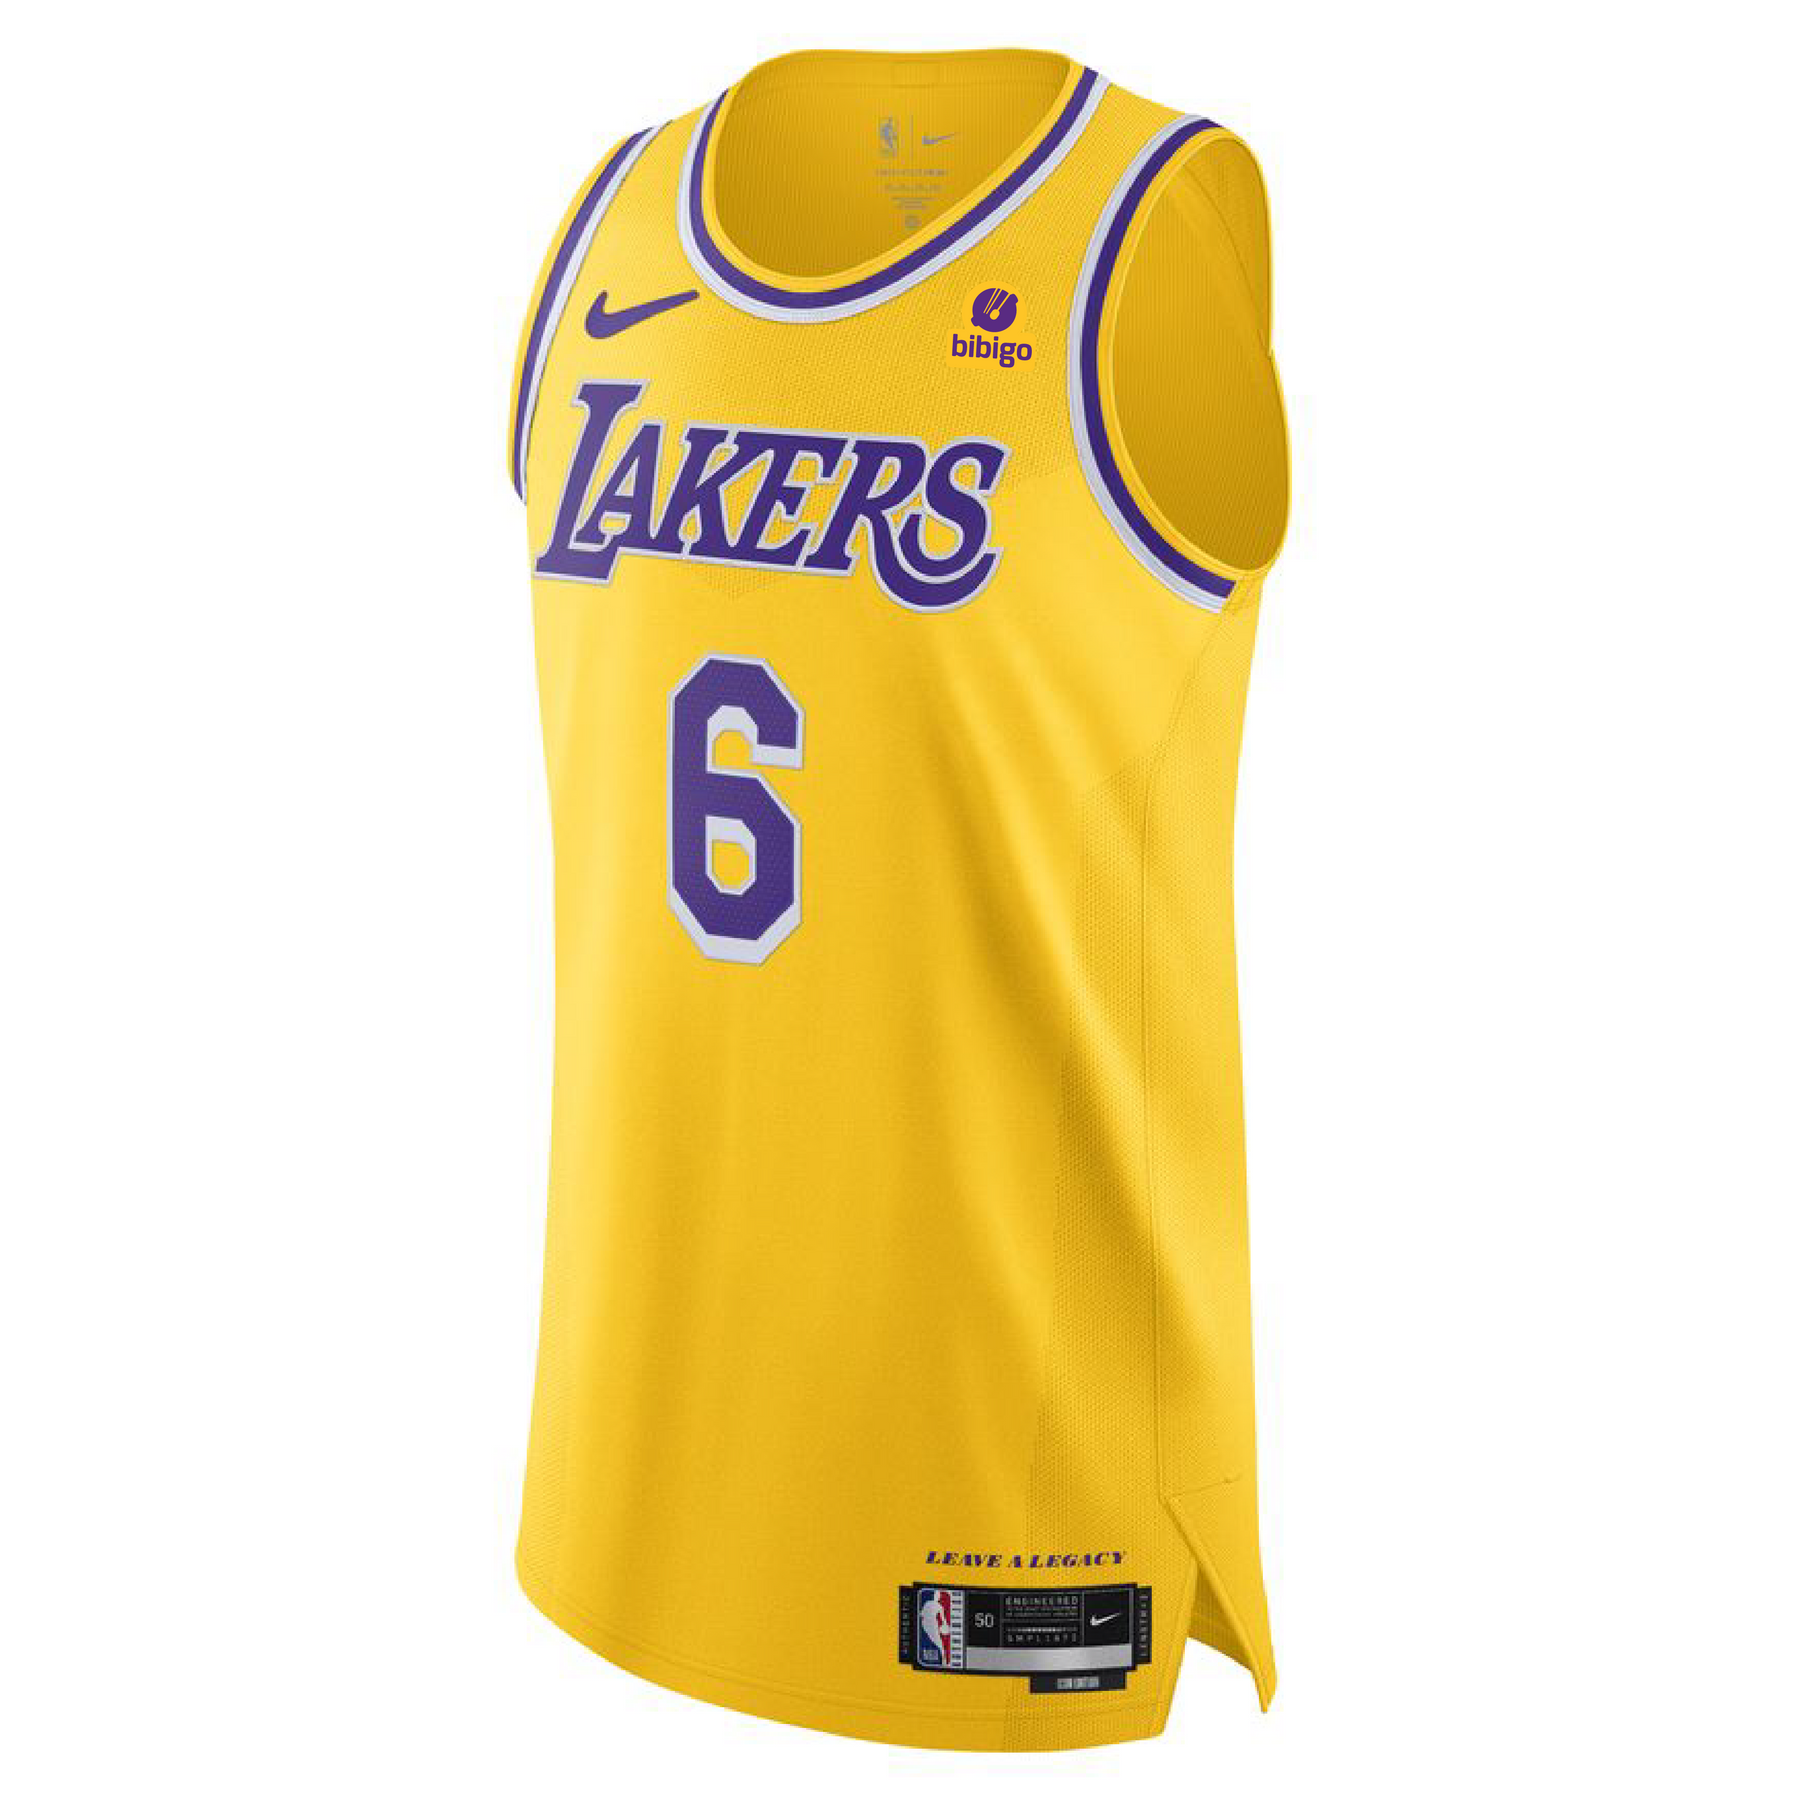 LeBron James' new No. 6 Lakers jersey is now available for purchase